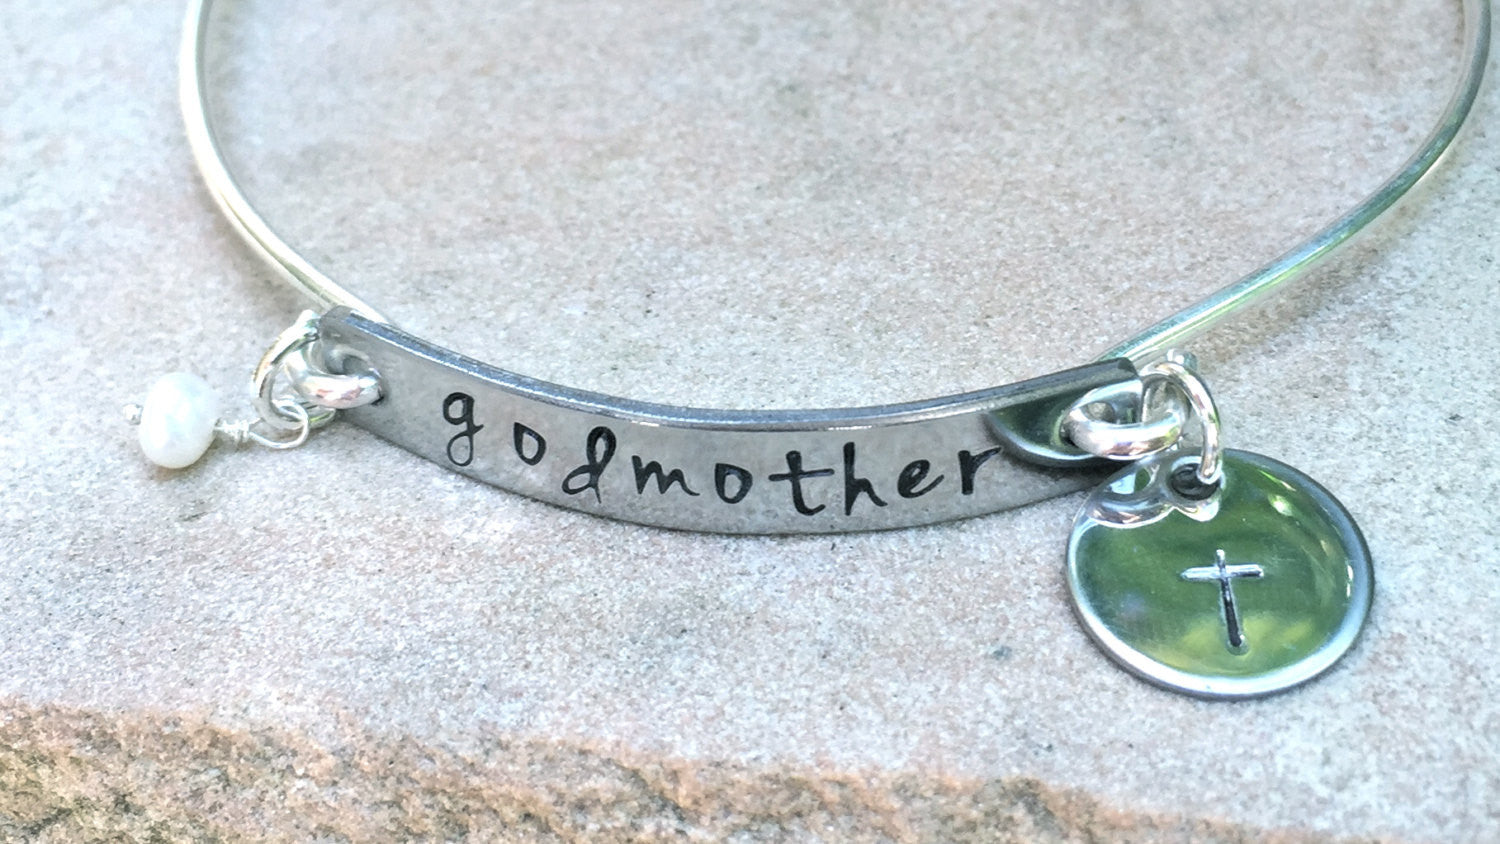 Godmother Bracelet, Godmother Gifts, Baptism Gifts, Personalized Godmother Jewlelry, natashaaloha - Natashaaloha, jewelry, bracelets, necklace, keychains, fishing lures, gifts for men, charms, personalized, 